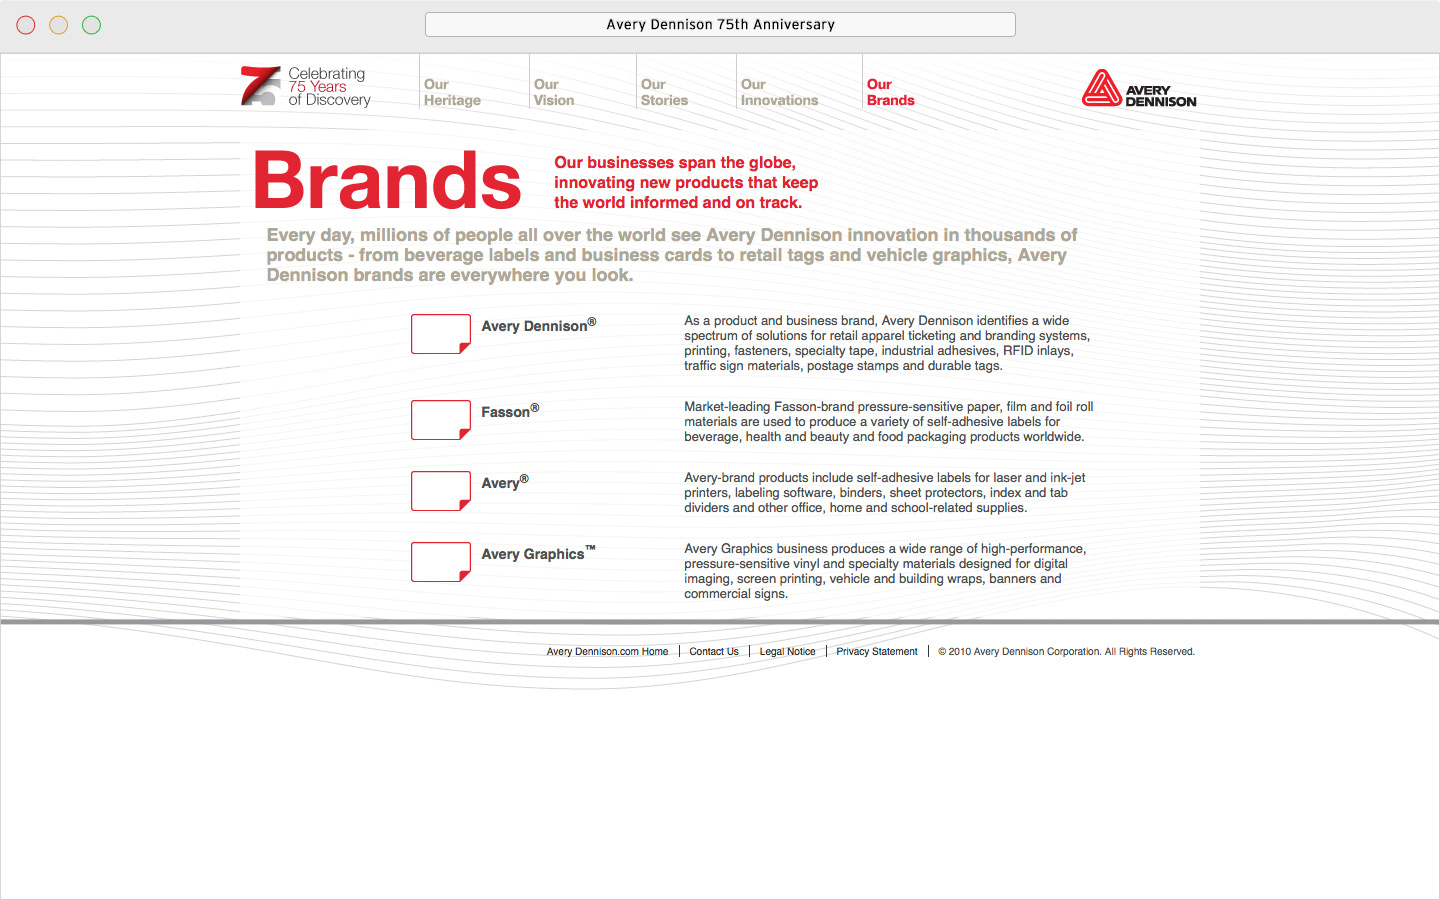 Avery Dennison 75th anniversary microsite Our Brands page